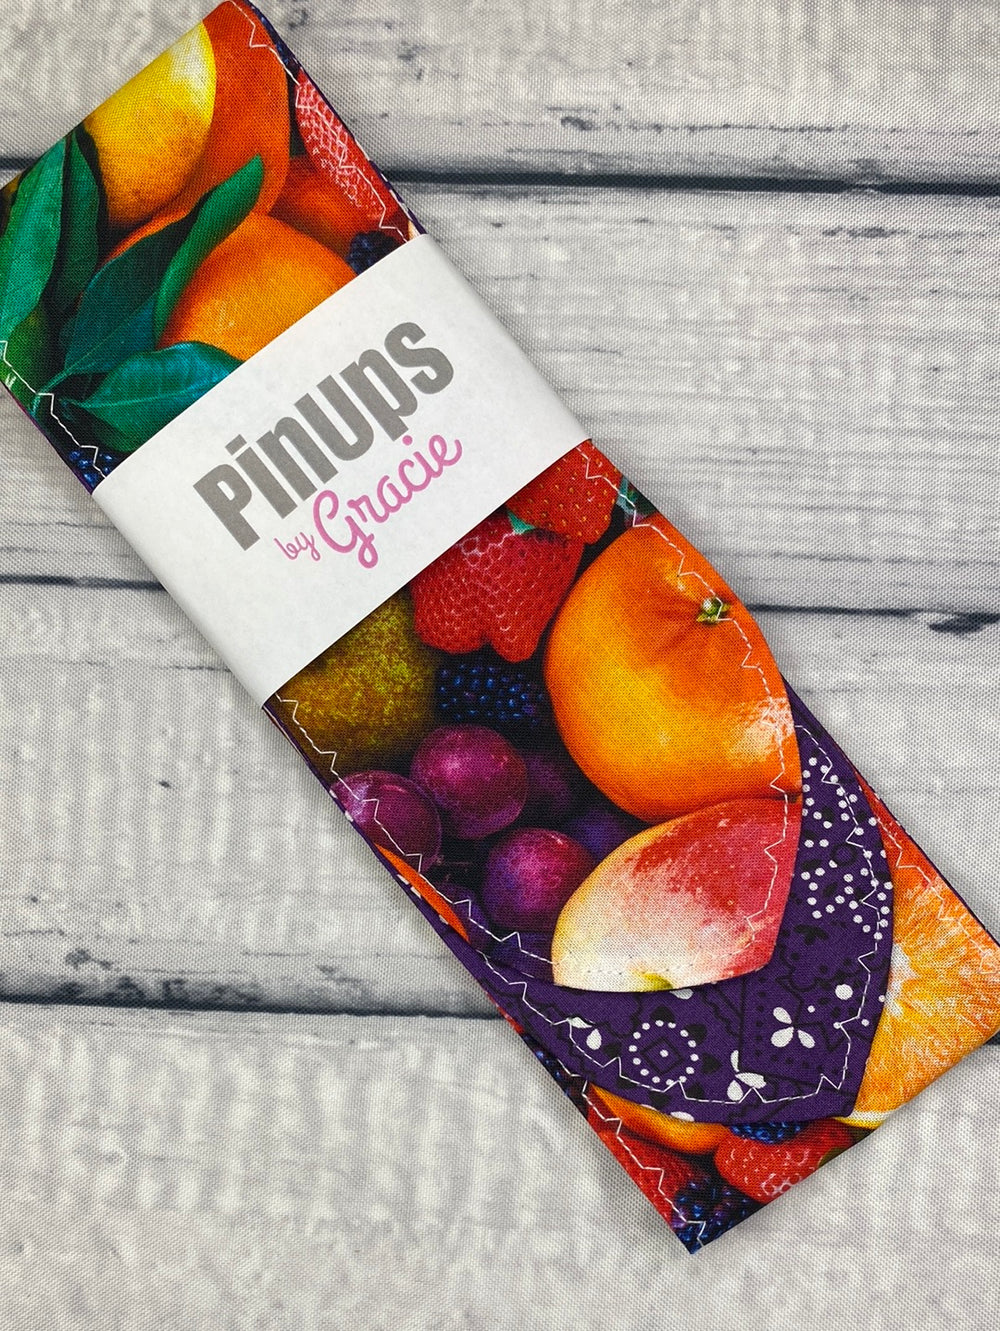 PinUps by Gracie - Now with Real Fruit